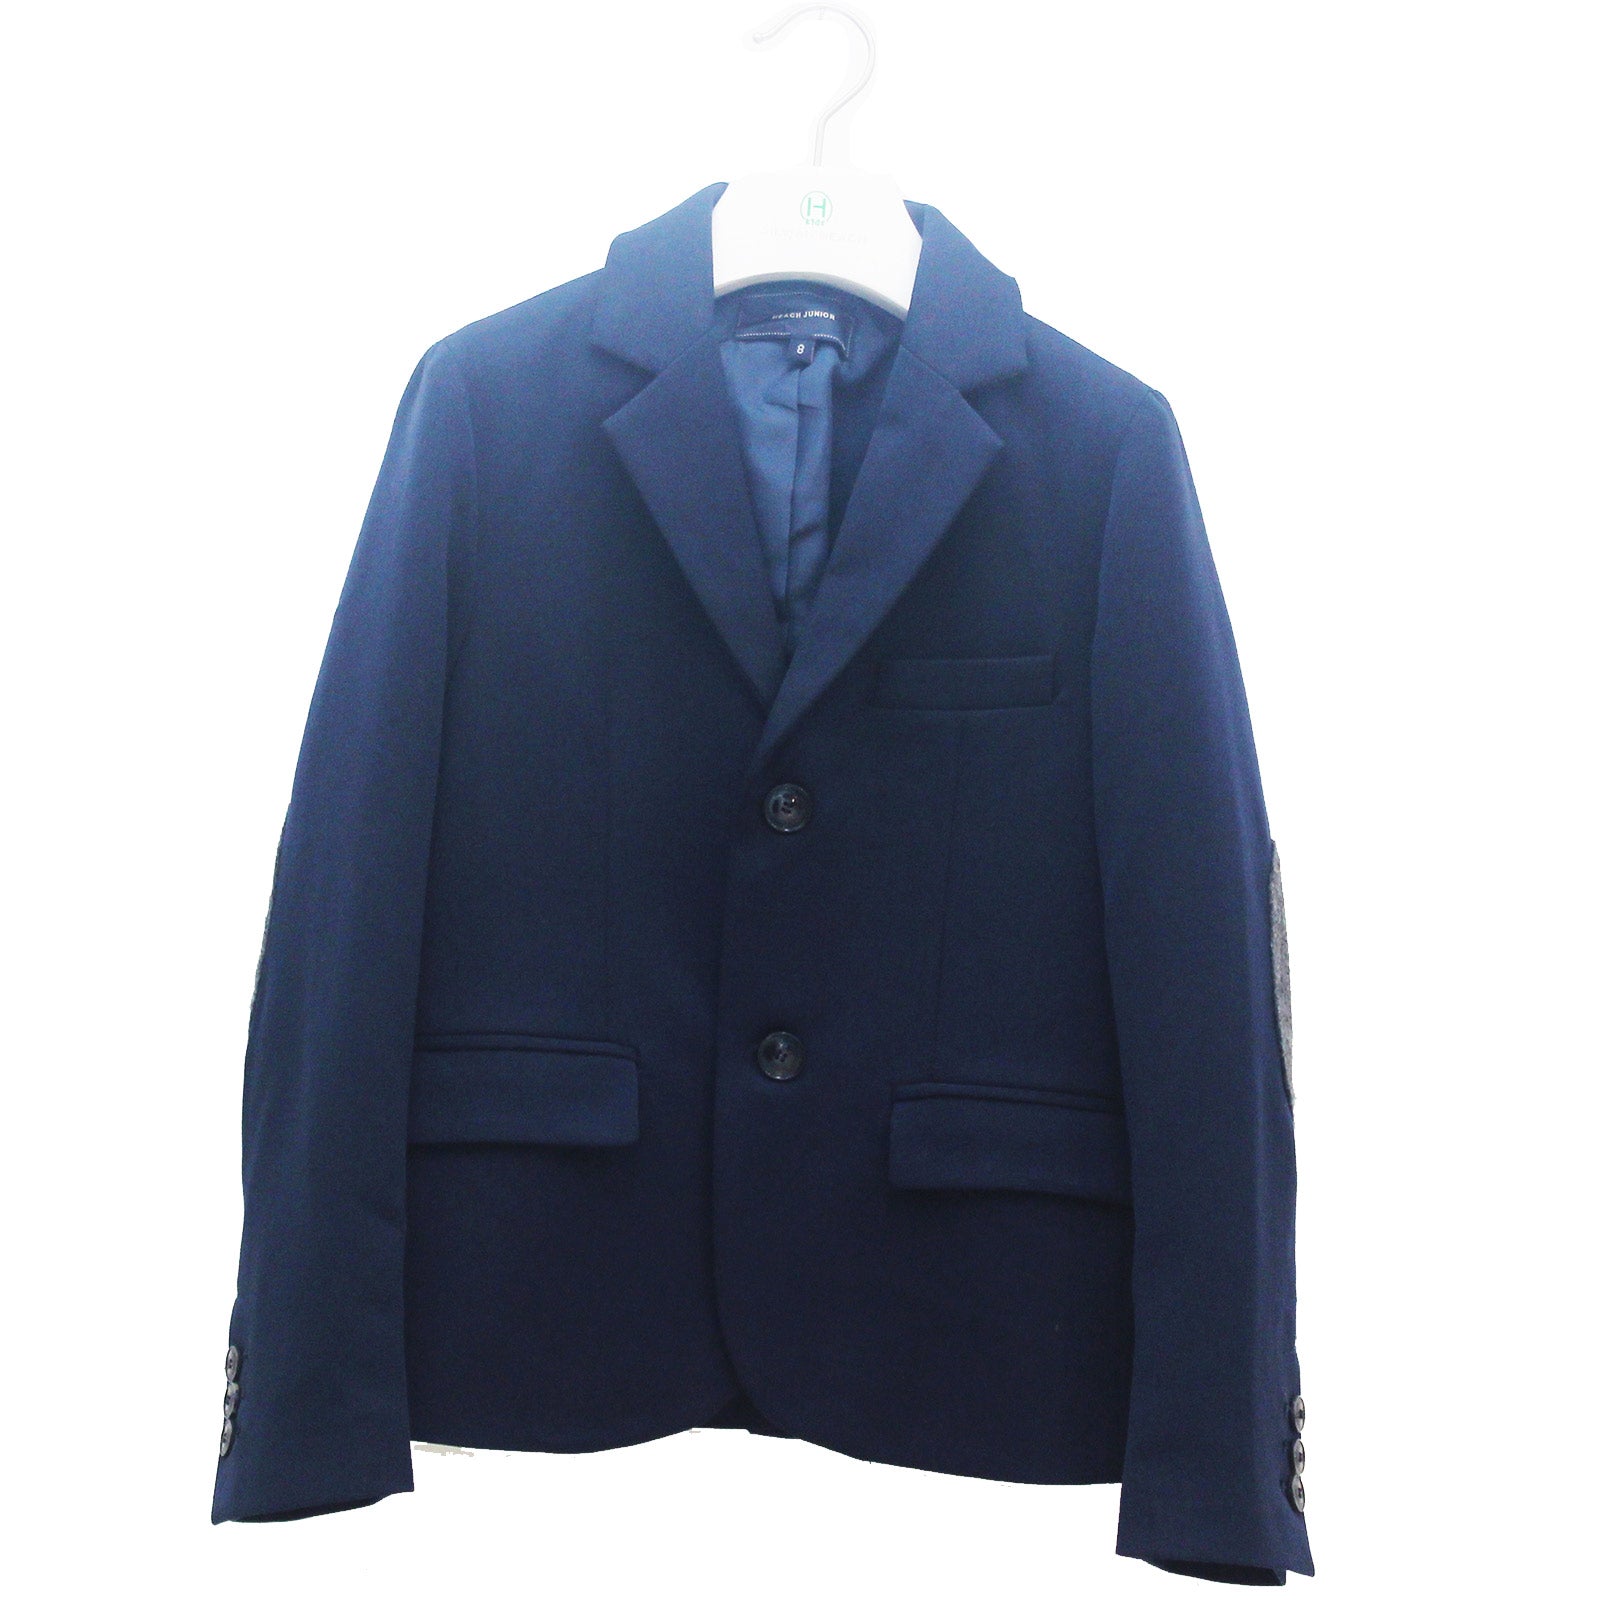 
  Blazer from the children's clothing line Silvian Heach classic cut; two buttons and front pock...